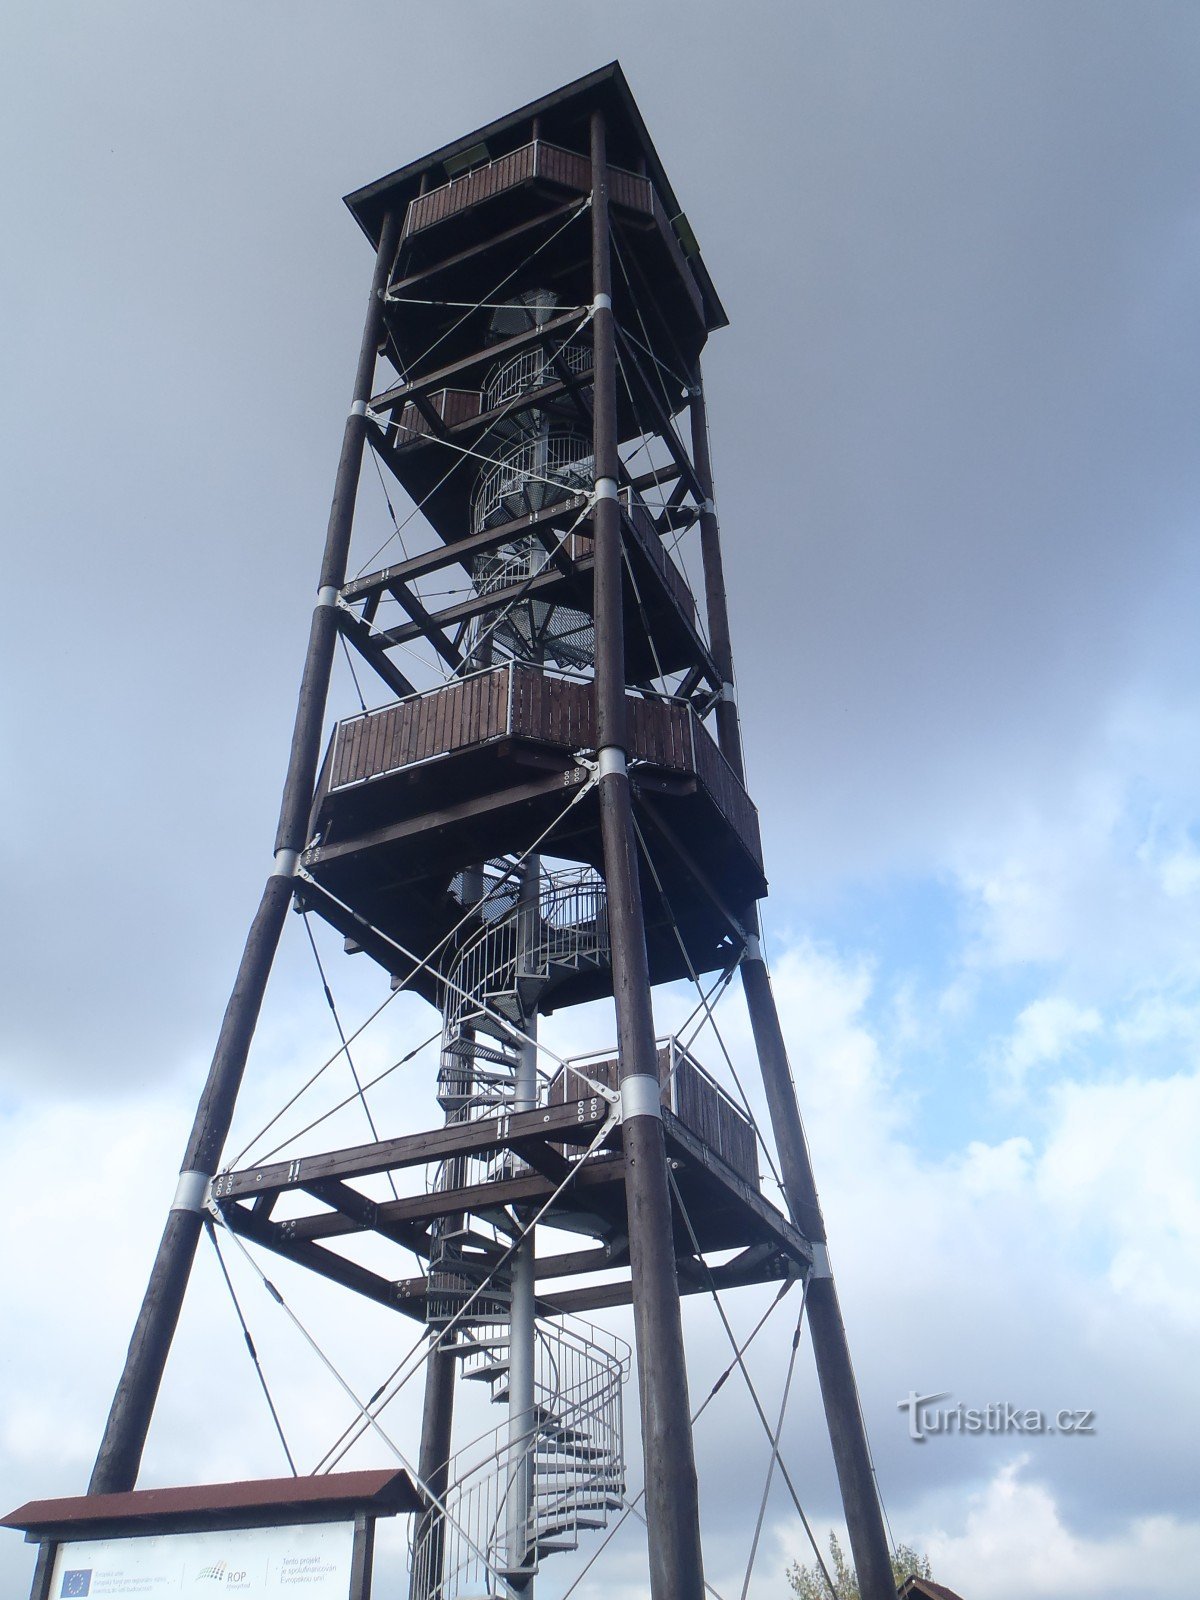 Majak lookout tower